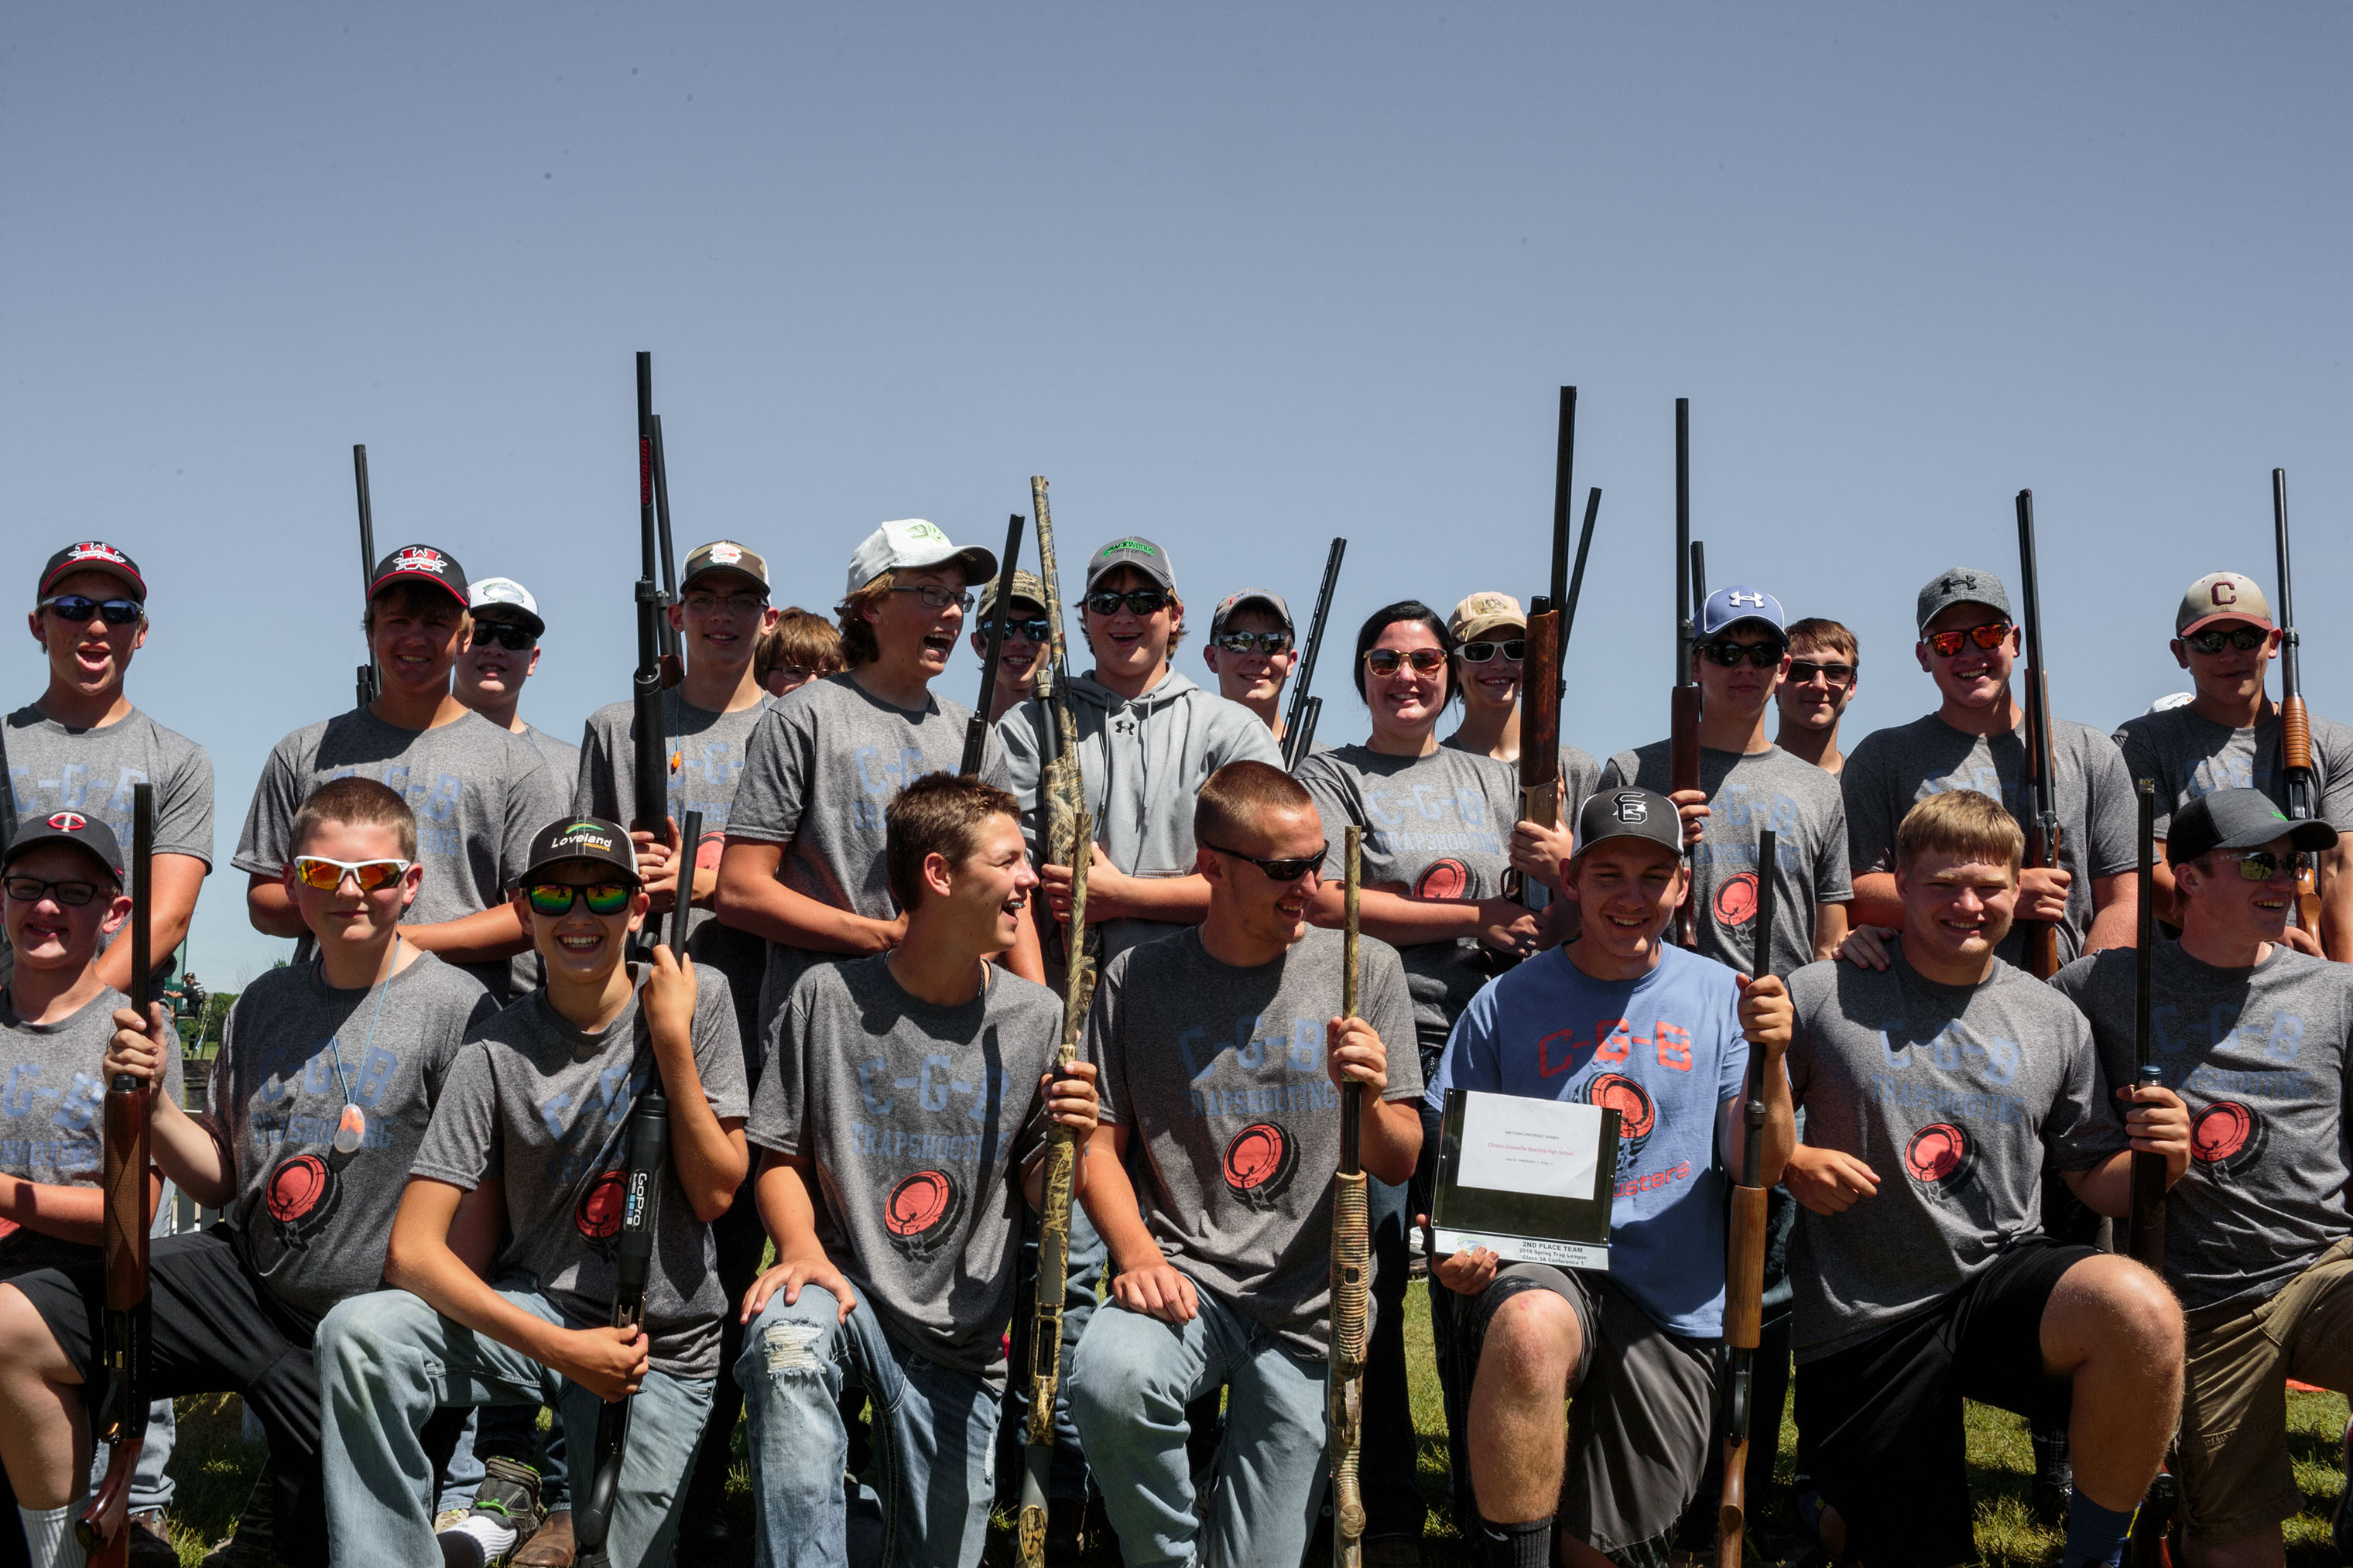 The C-G-B Trapshooting team lines up for a team photo. (Sarah Blesener for TIME)